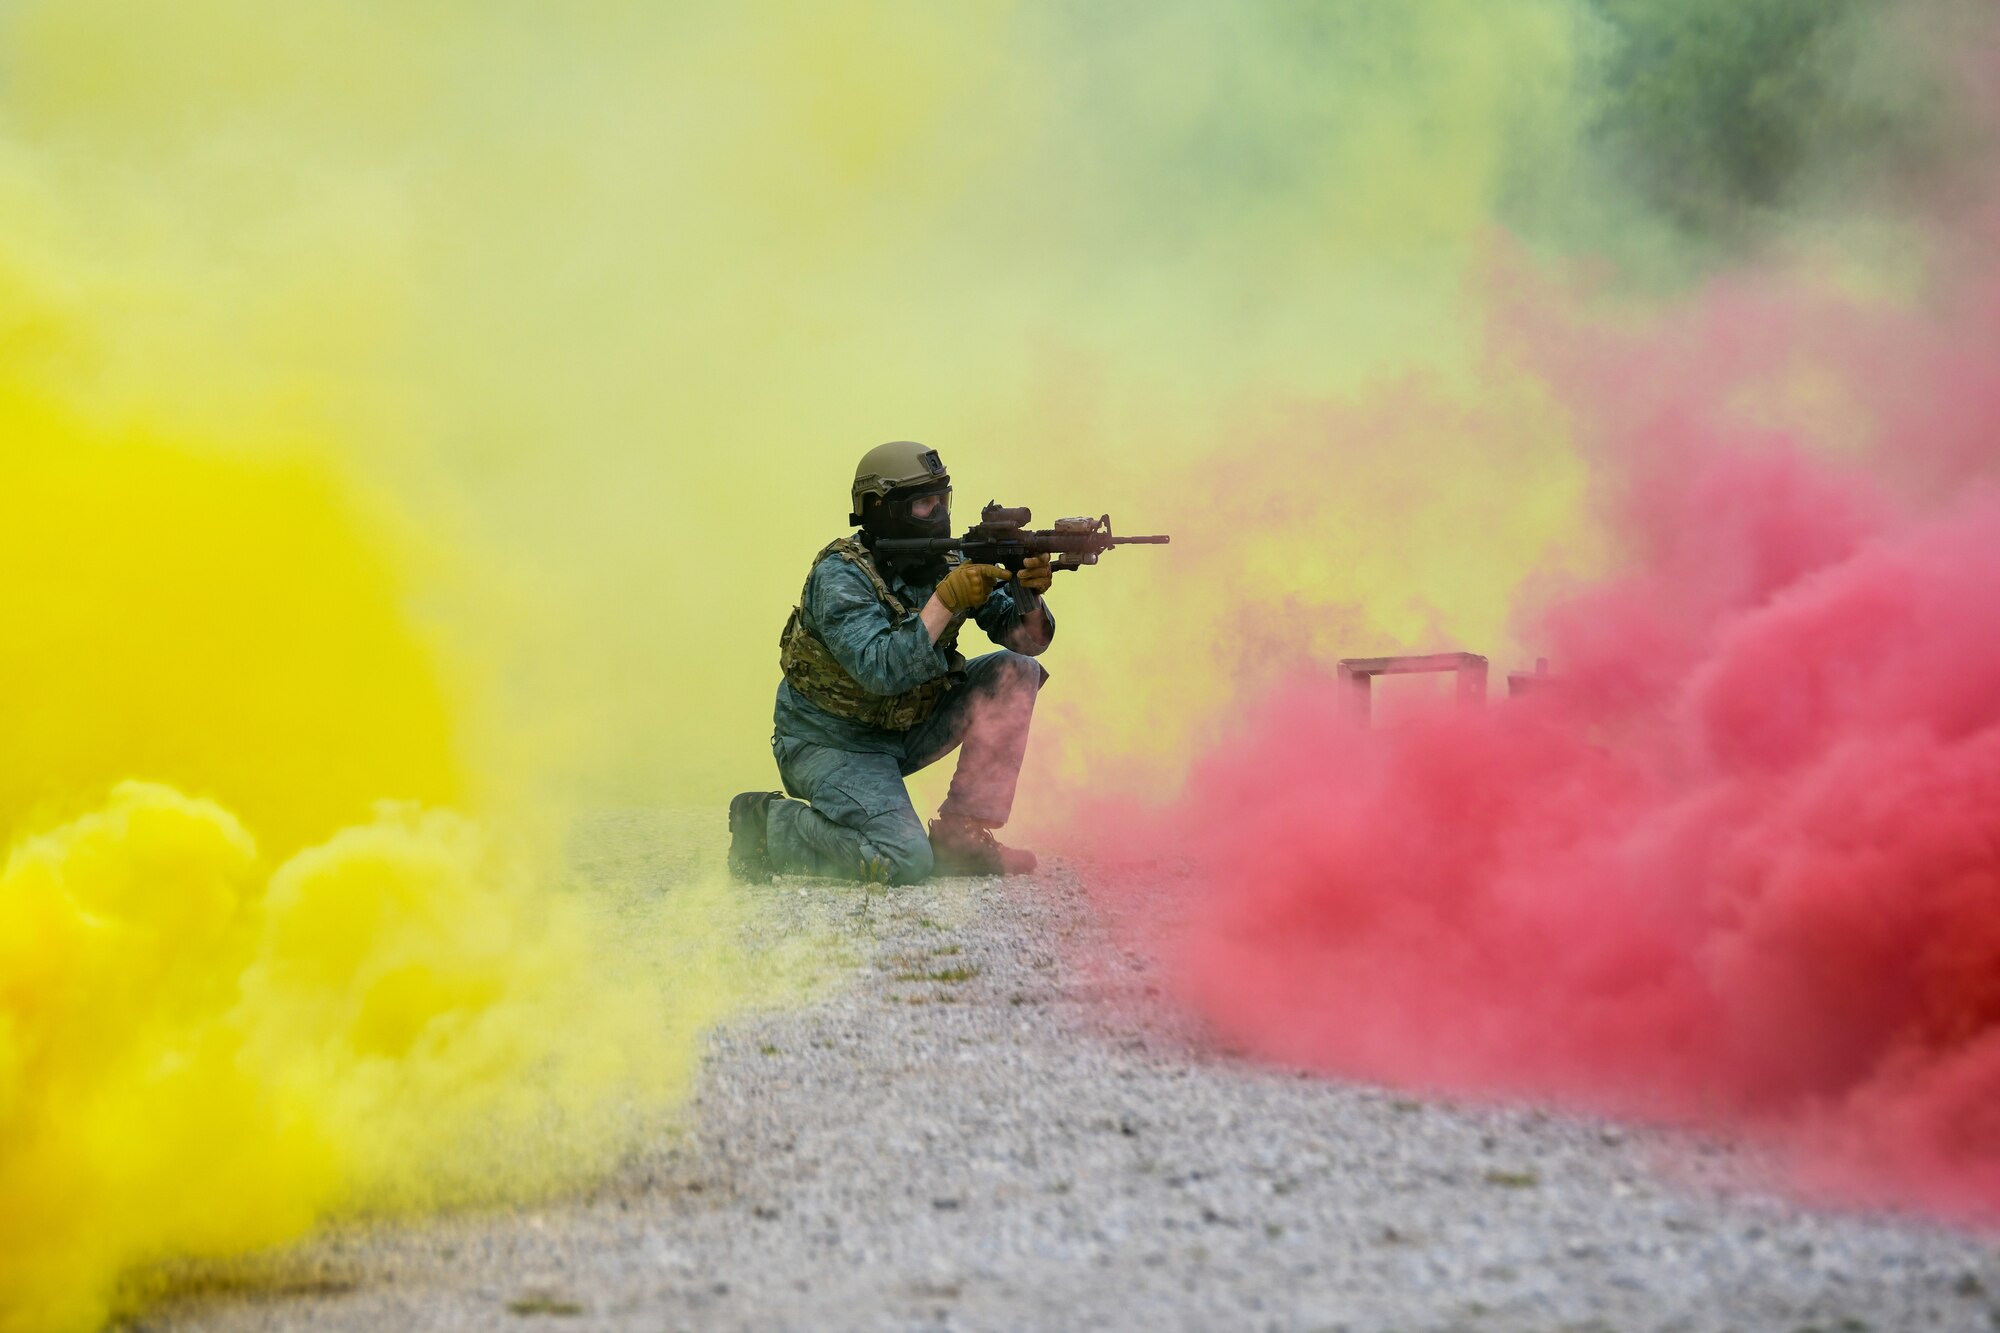 Master Sgt. Keith Carter, a member of the 433rd Security Forces Squadron, Lackland Air Force Base, Texas, engages an attacking force with dye-marker rounds from the cover of a smoke screen during an area security operations exercise, May 19, 2023, at Camp James A. Garfield Joint Military Training Center, Ohio.